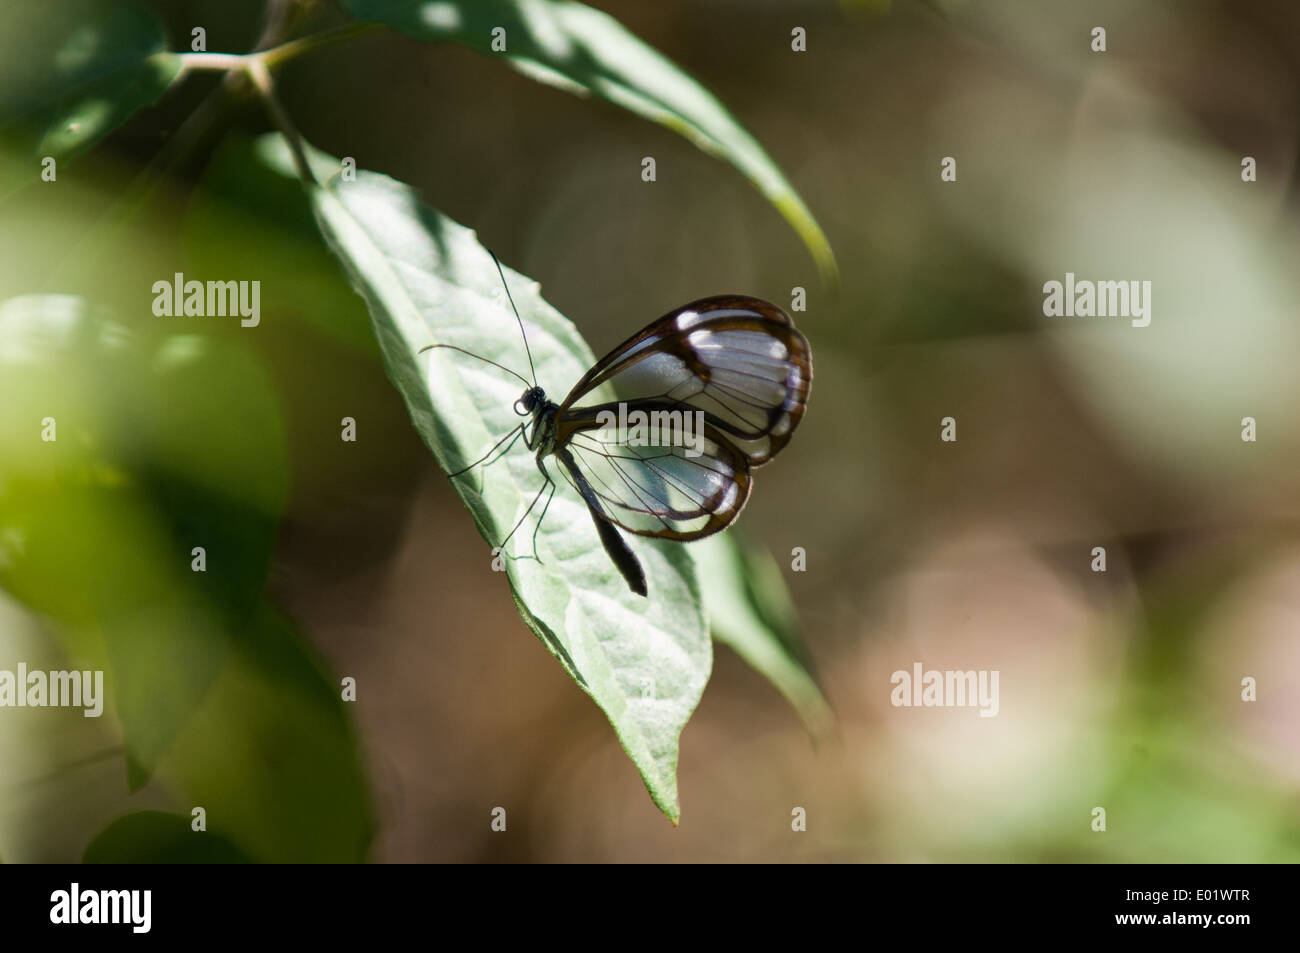 Clearwing or Glasswing butterfly, with trasparent wings (Greta polissena), on leaf. Stock Photo